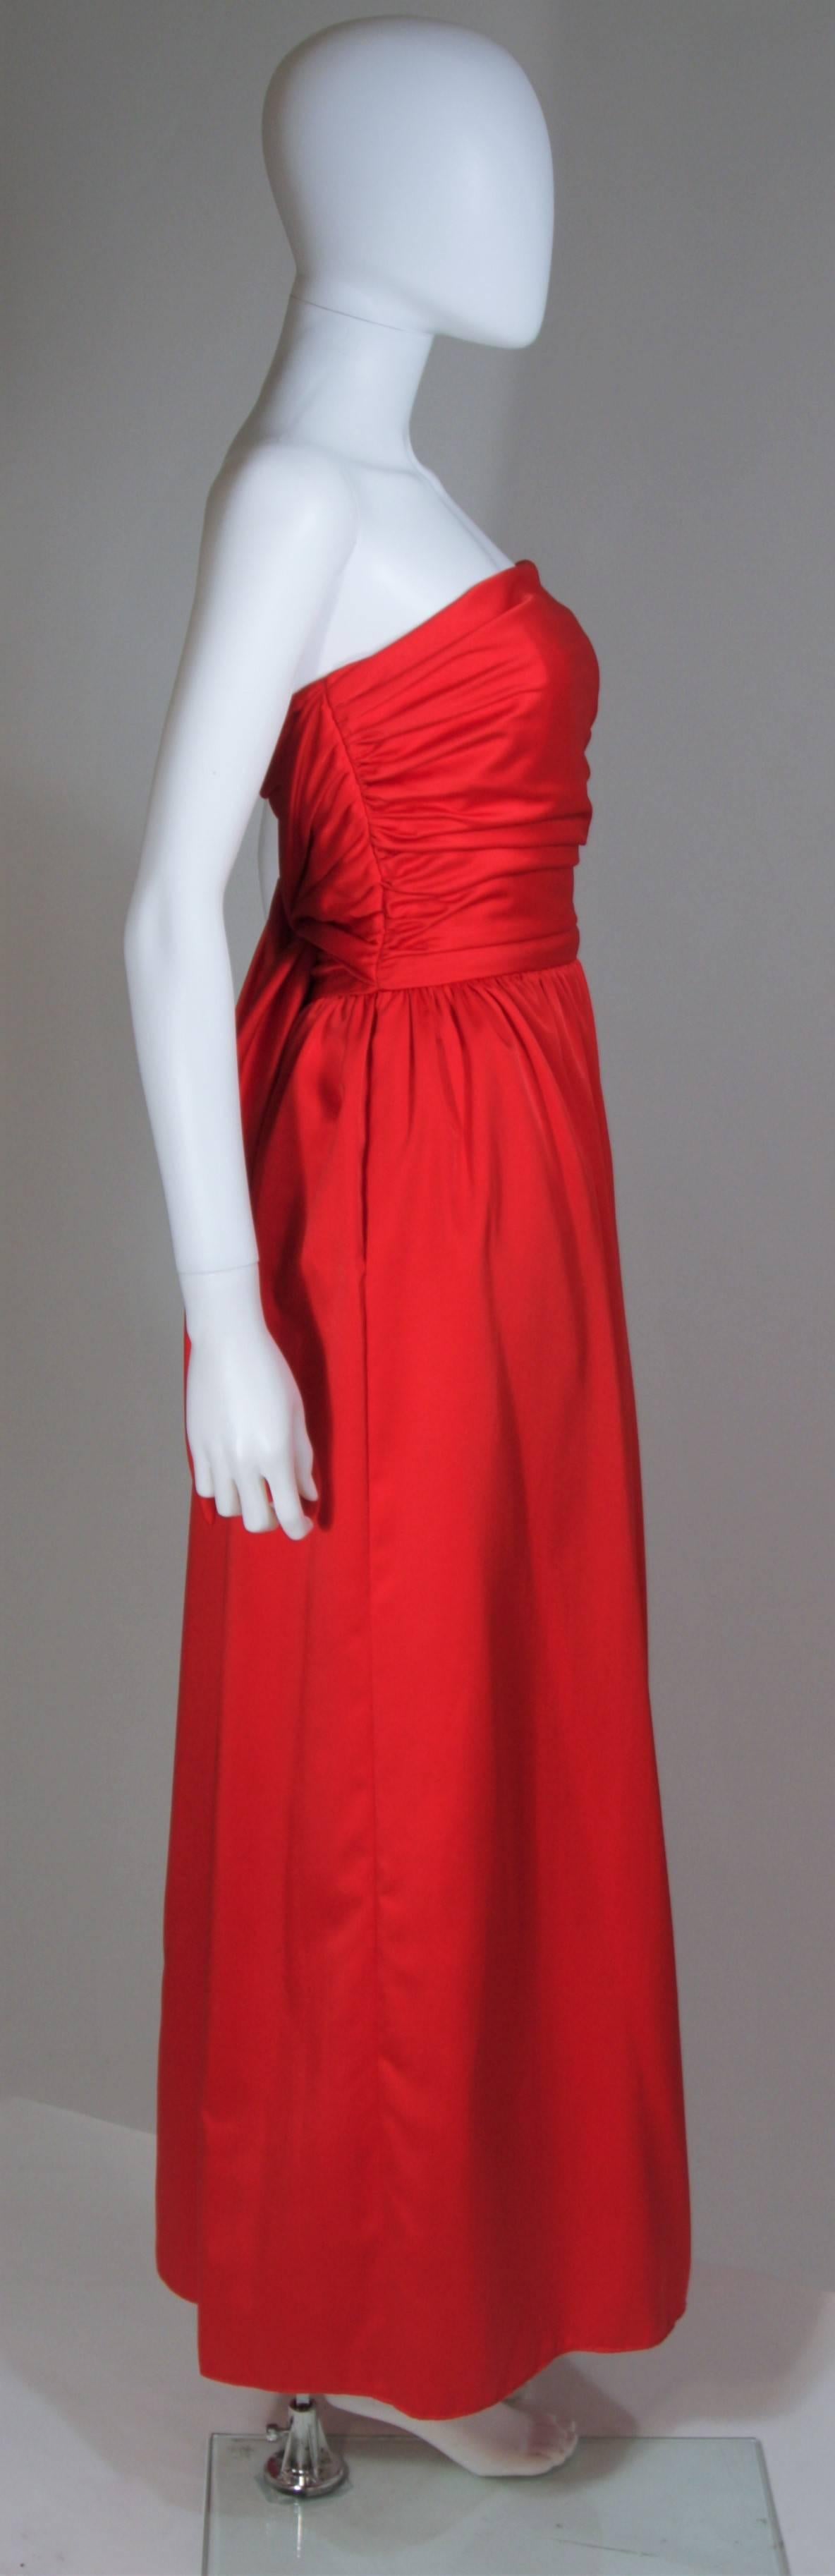 ANTHONY MUTO Red Gown with Gathered Bodice and Waist Tie Size 4-6 In Excellent Condition For Sale In Los Angeles, CA